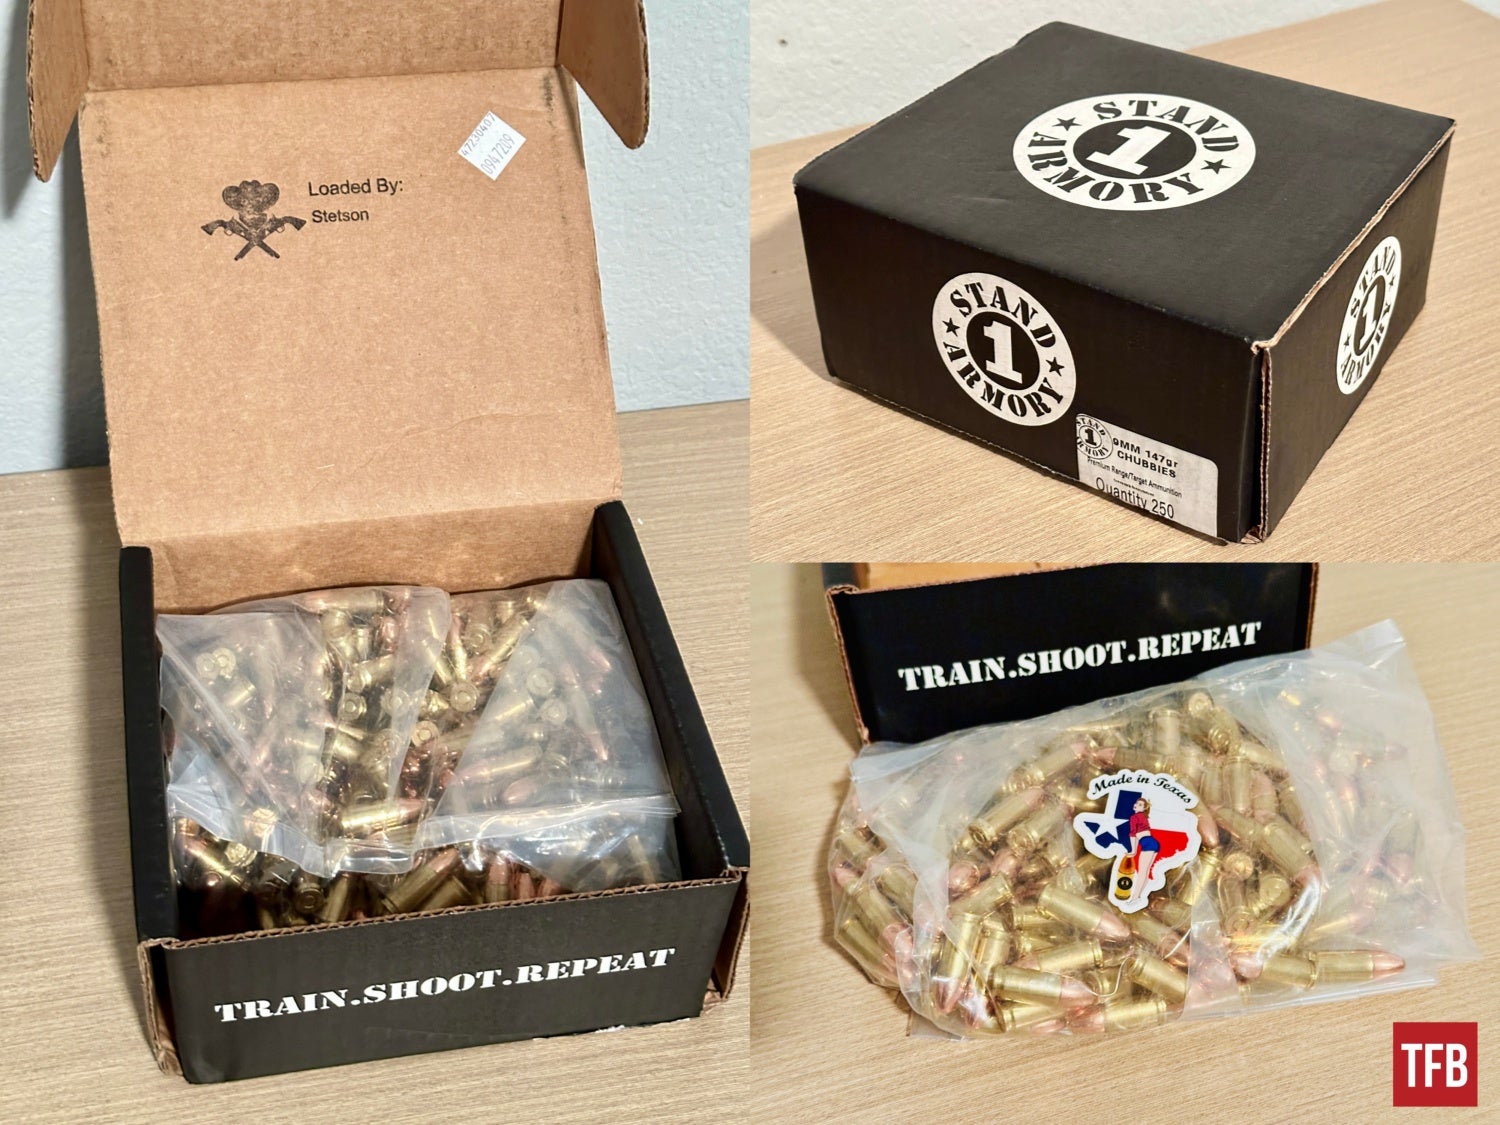 Stand 1 Armory's packaging for the box of 250 tester rounds they sent us.